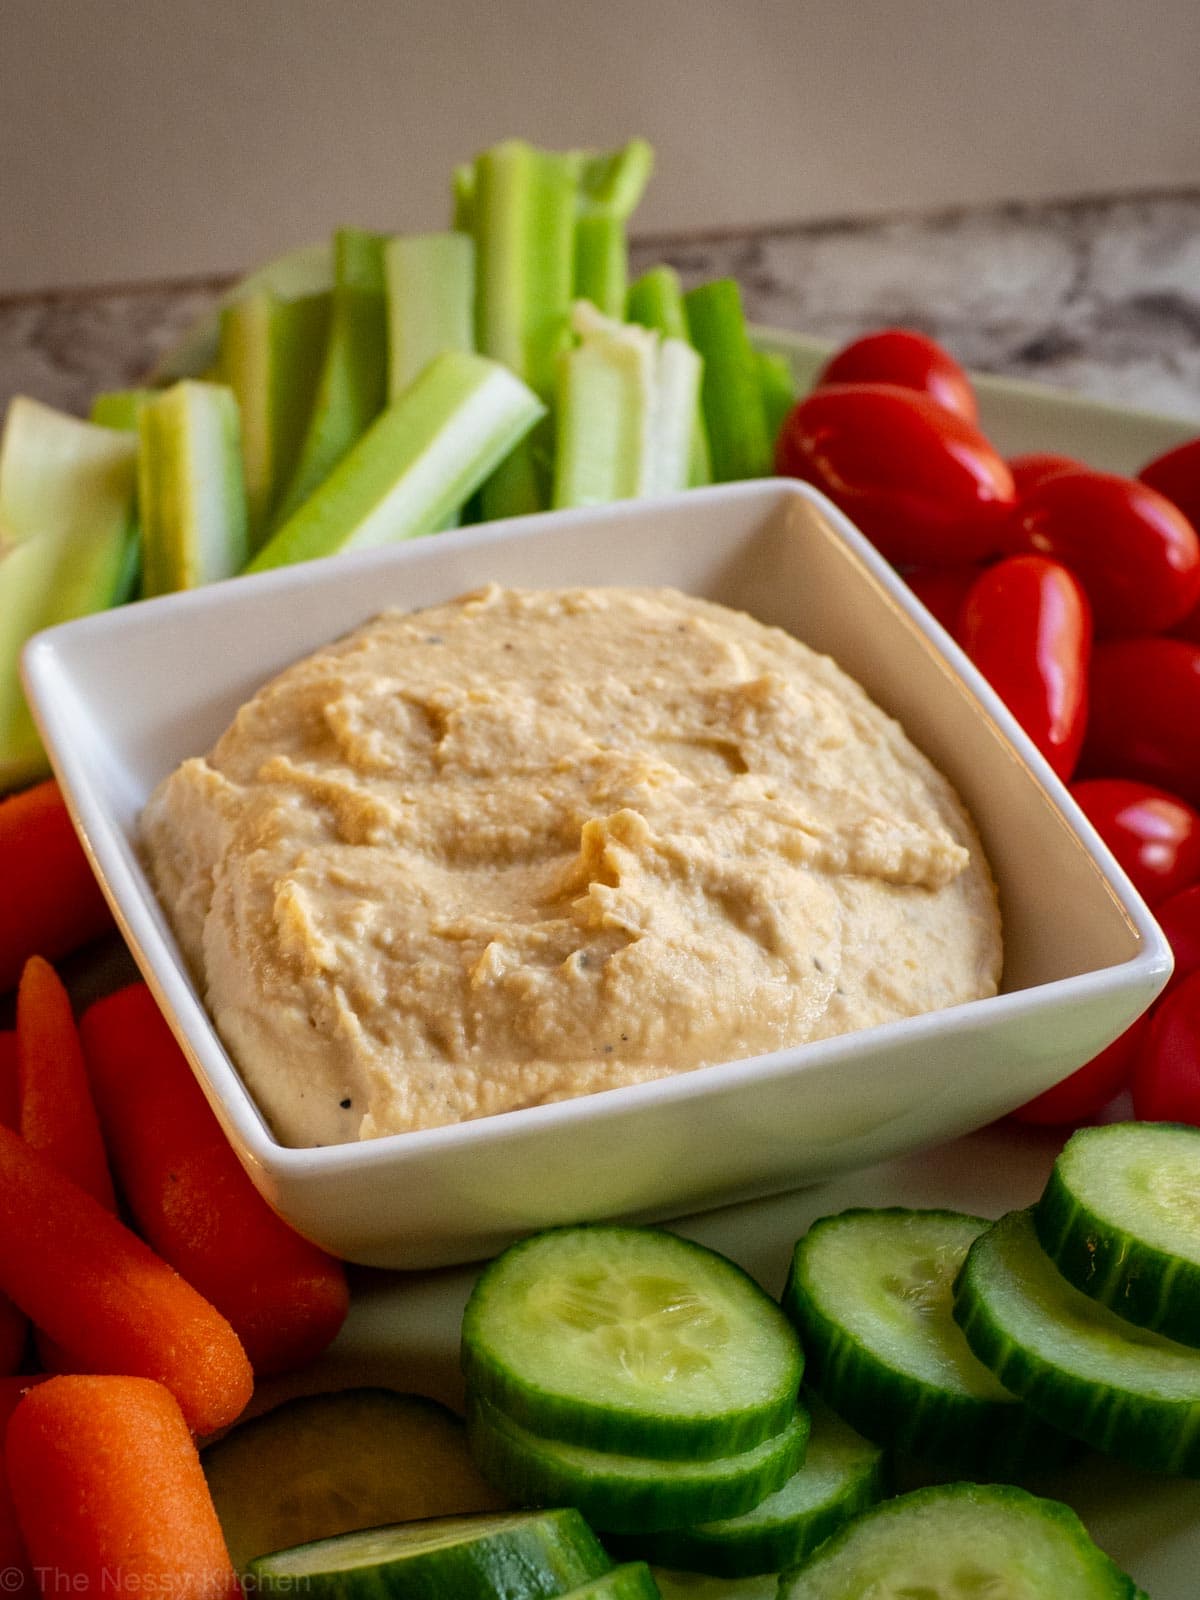 No garlic hummus in a white square bowl surrounded by celery, carrots, tomatoes and cucumbers.